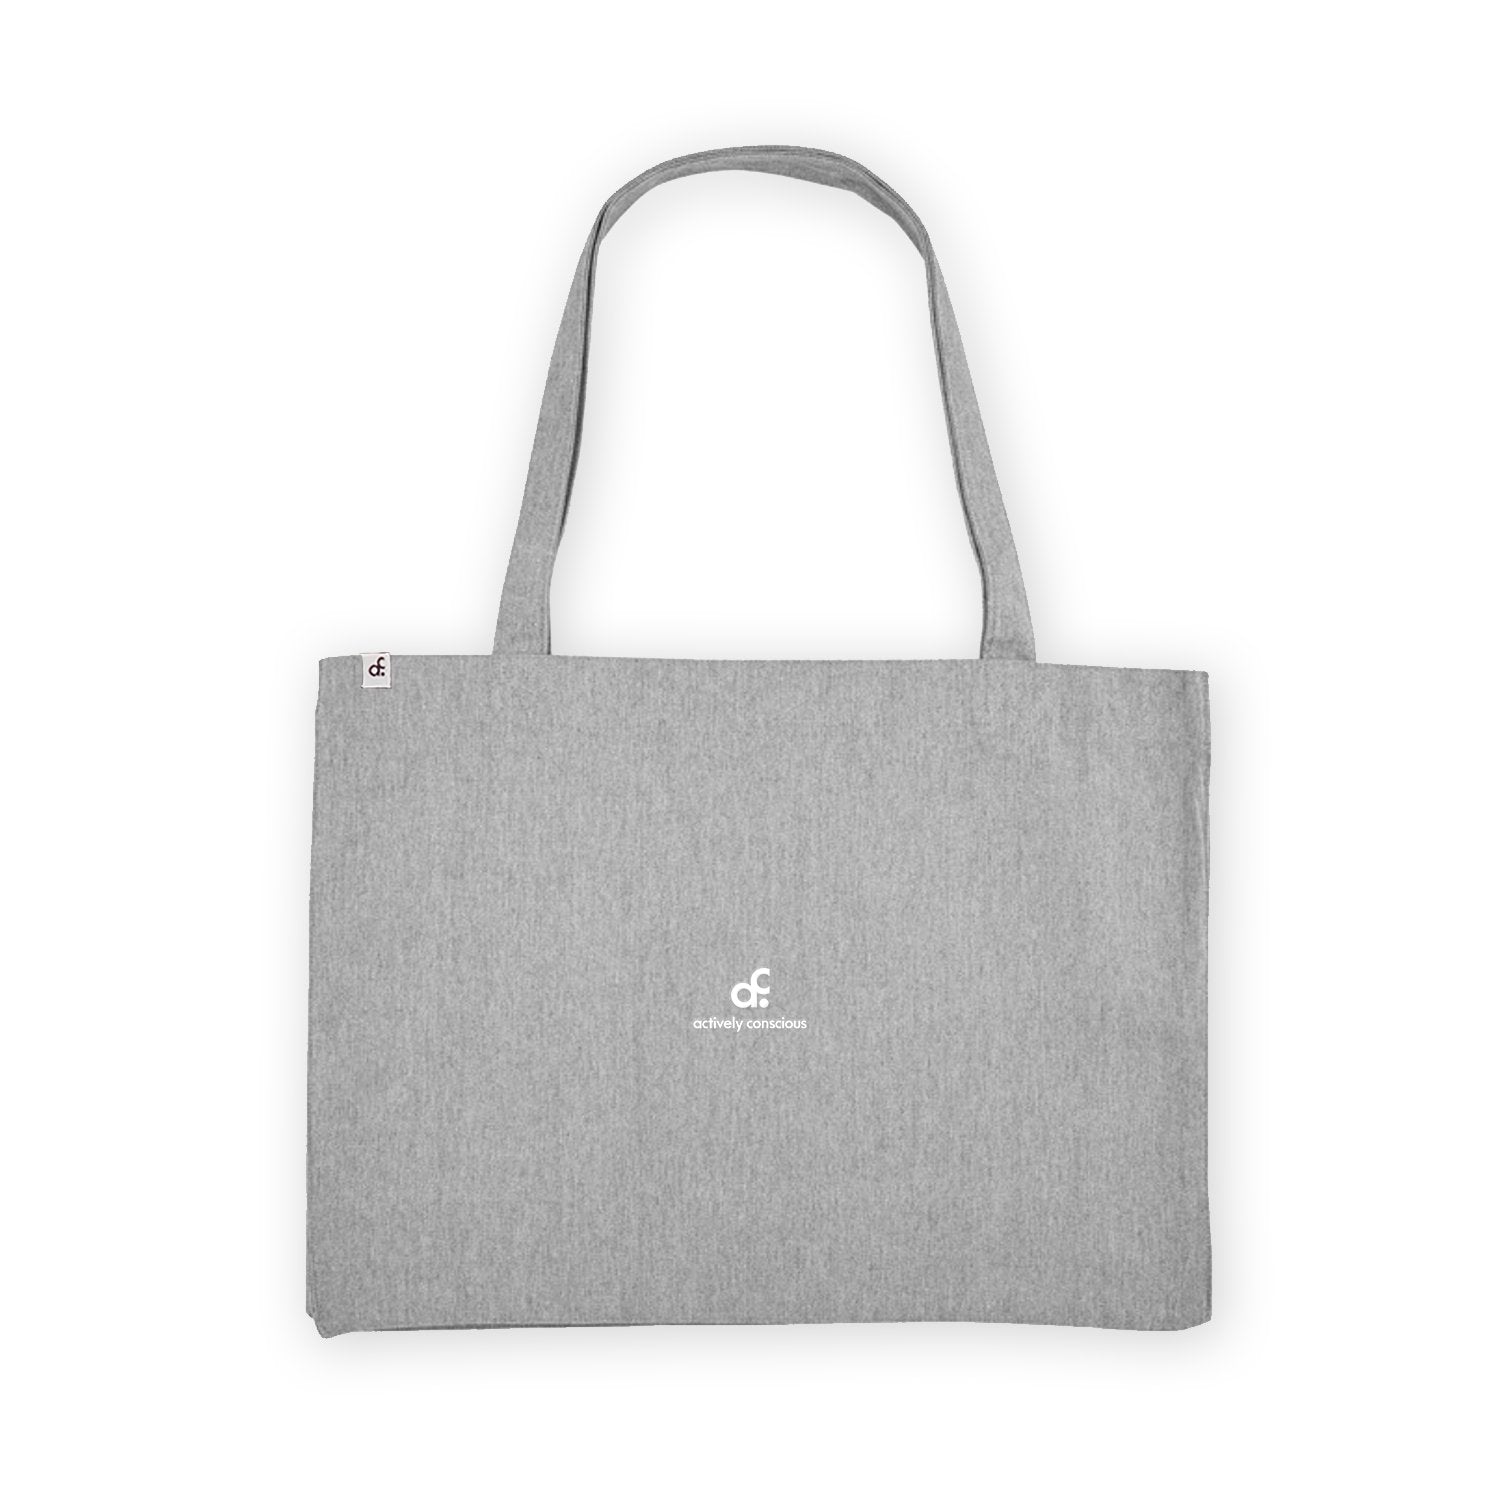 Minimal 'AC' Logo Grey Oversized Recycled Tote Bag - Actively Conscious